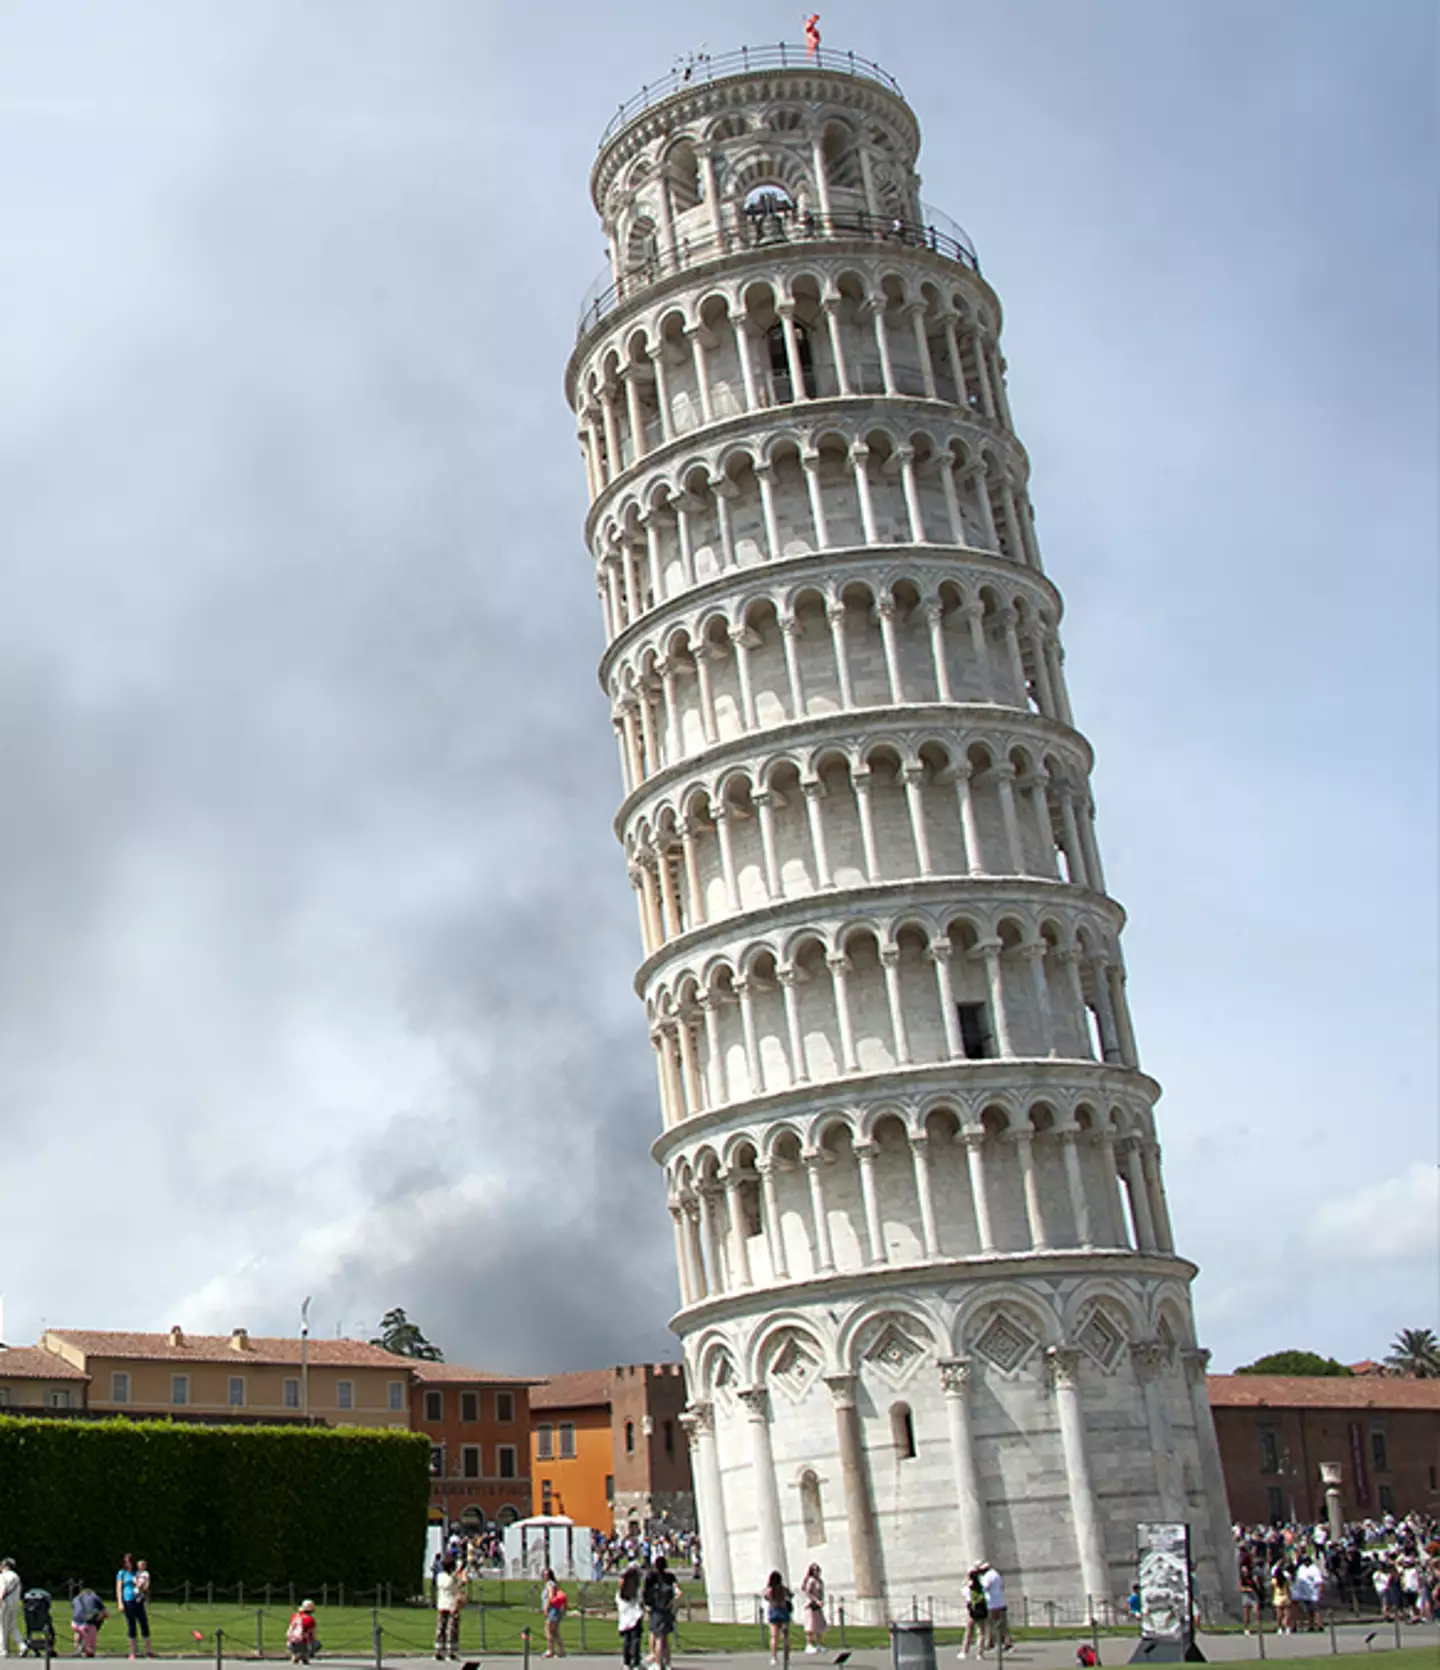 Architects have compensated for the uneven weight to prevent the tower from toppling over / Athanasios Gioumpasis/Mondadori Portfolio/Getty Images